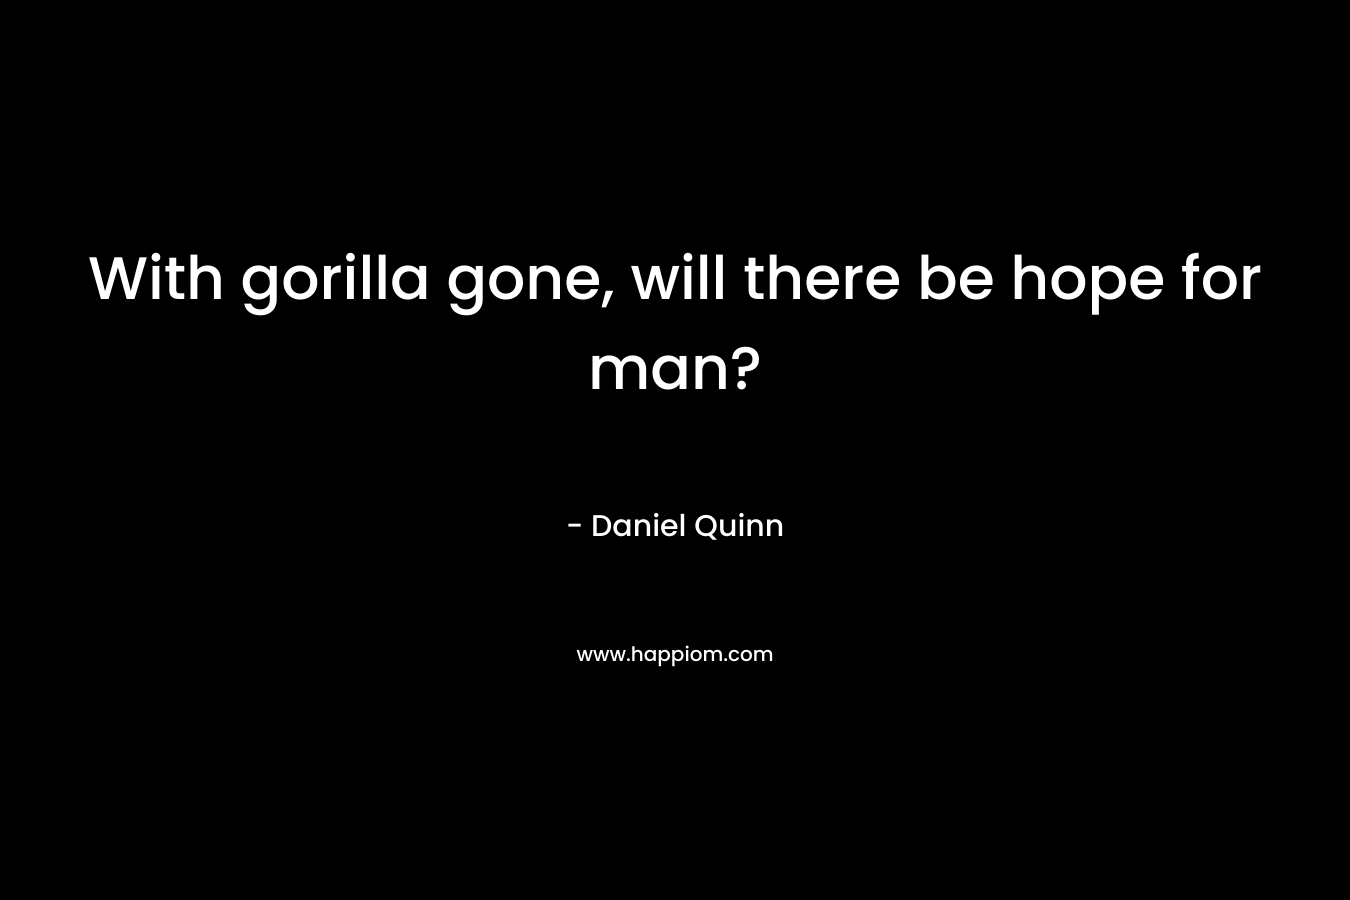 With gorilla gone, will there be hope for man?